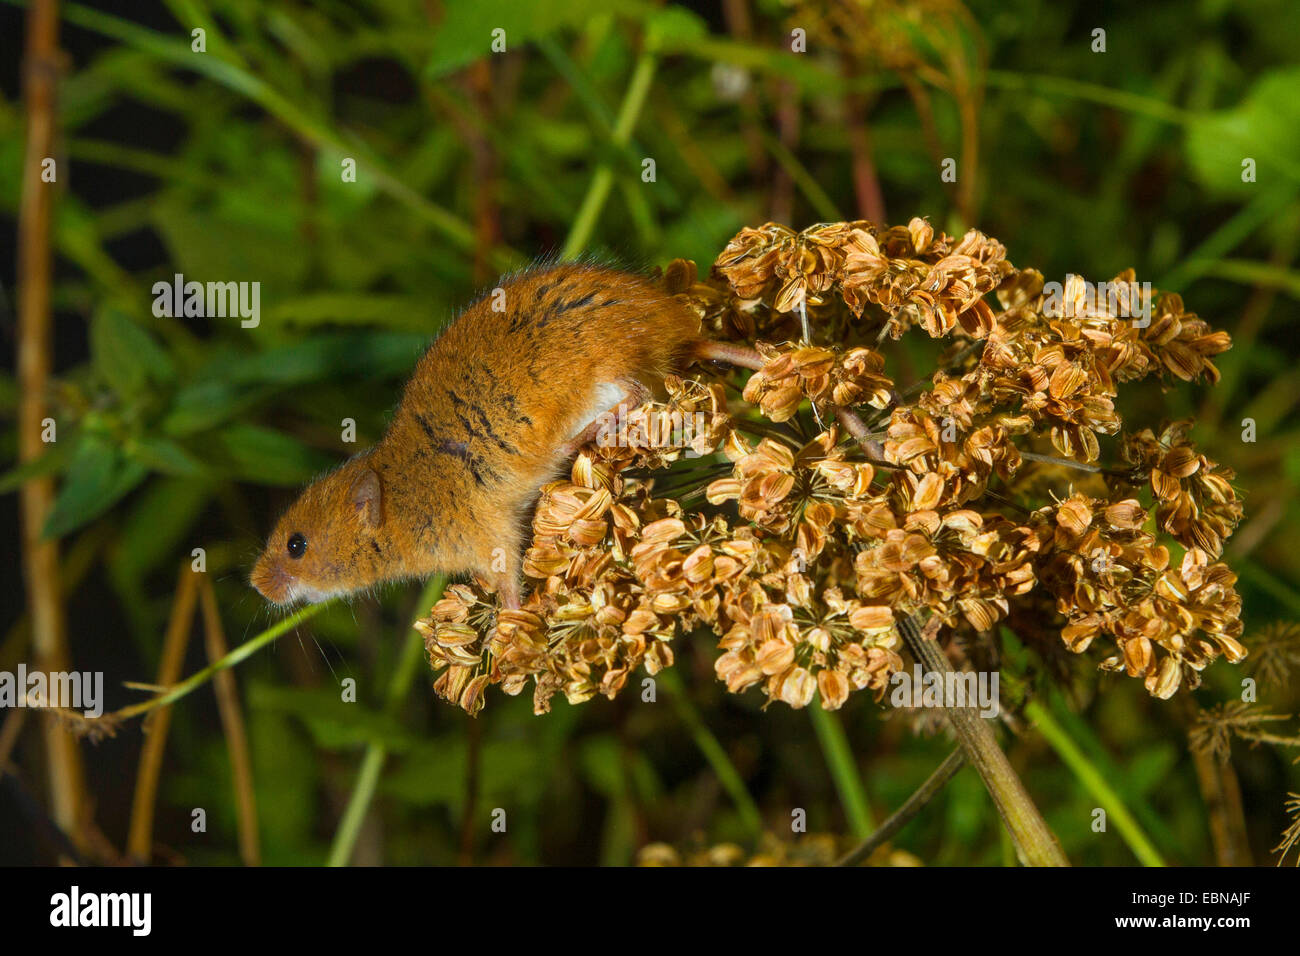 Old World harvest mouse (Micromys minutus), on fruit umbel of angelica Stock Photo